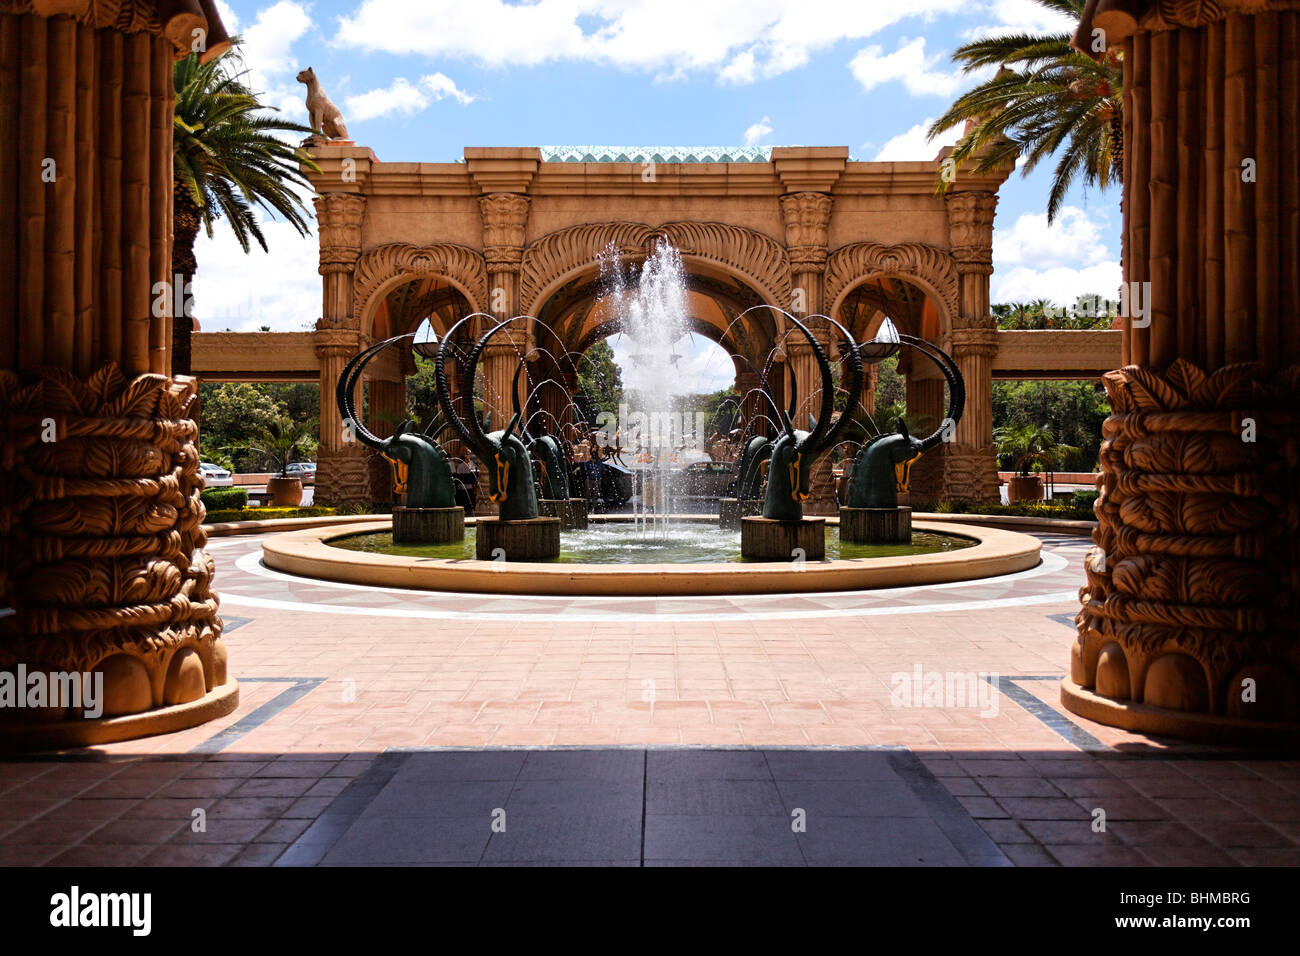 Water Fountain in the Palace of the Lost City Hotel Suncity Northwest Province South Africa Stock Photo